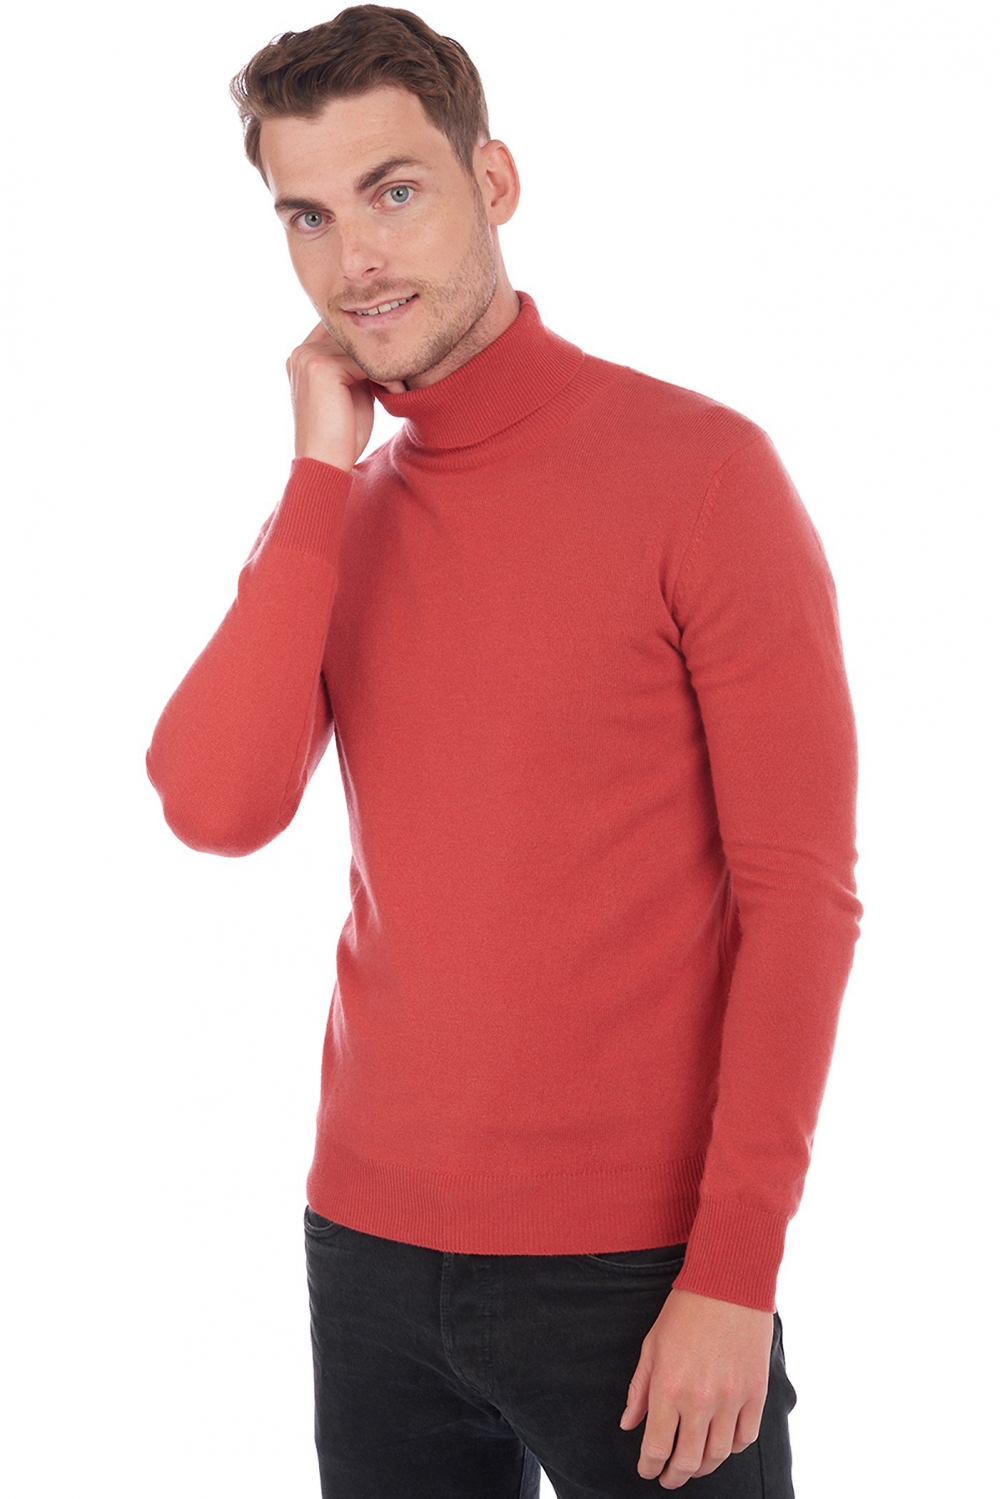 Cashmere men basic sweaters at low prices tarry first quite coral m